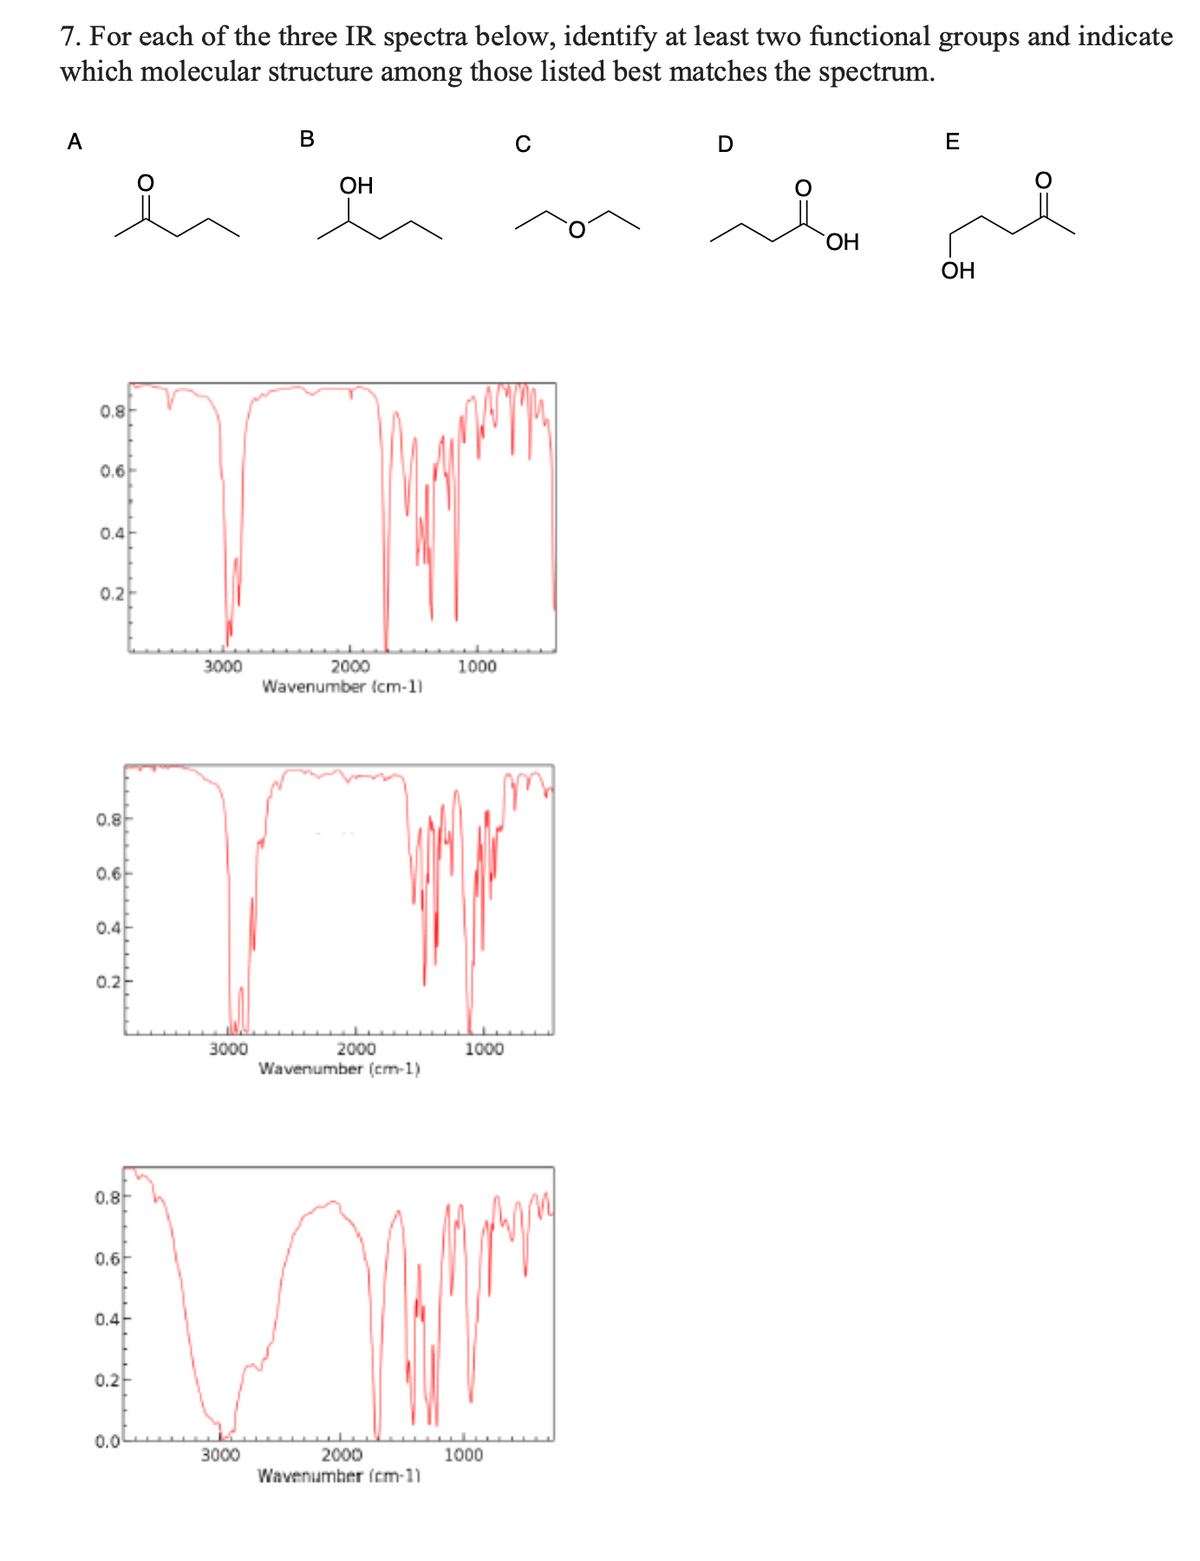 7. For each of the three IR spectra below, identify at least two functional groups and indicate
which molecular structure among those listed best matches the spectrum.
А
B
D
E
ОН
HO.
ОН
0.8-
0.6
0.4
0.2
3000
2000
Wavenumber (cm-1)
1000
0.8
0.6
0.4
0.2-
2000
Wavenumber (cm-1)
3000
1000
0.8-
0.6
0.4
0.2-
0.0
2000
Wavenumber (cm-11
3000
1000
